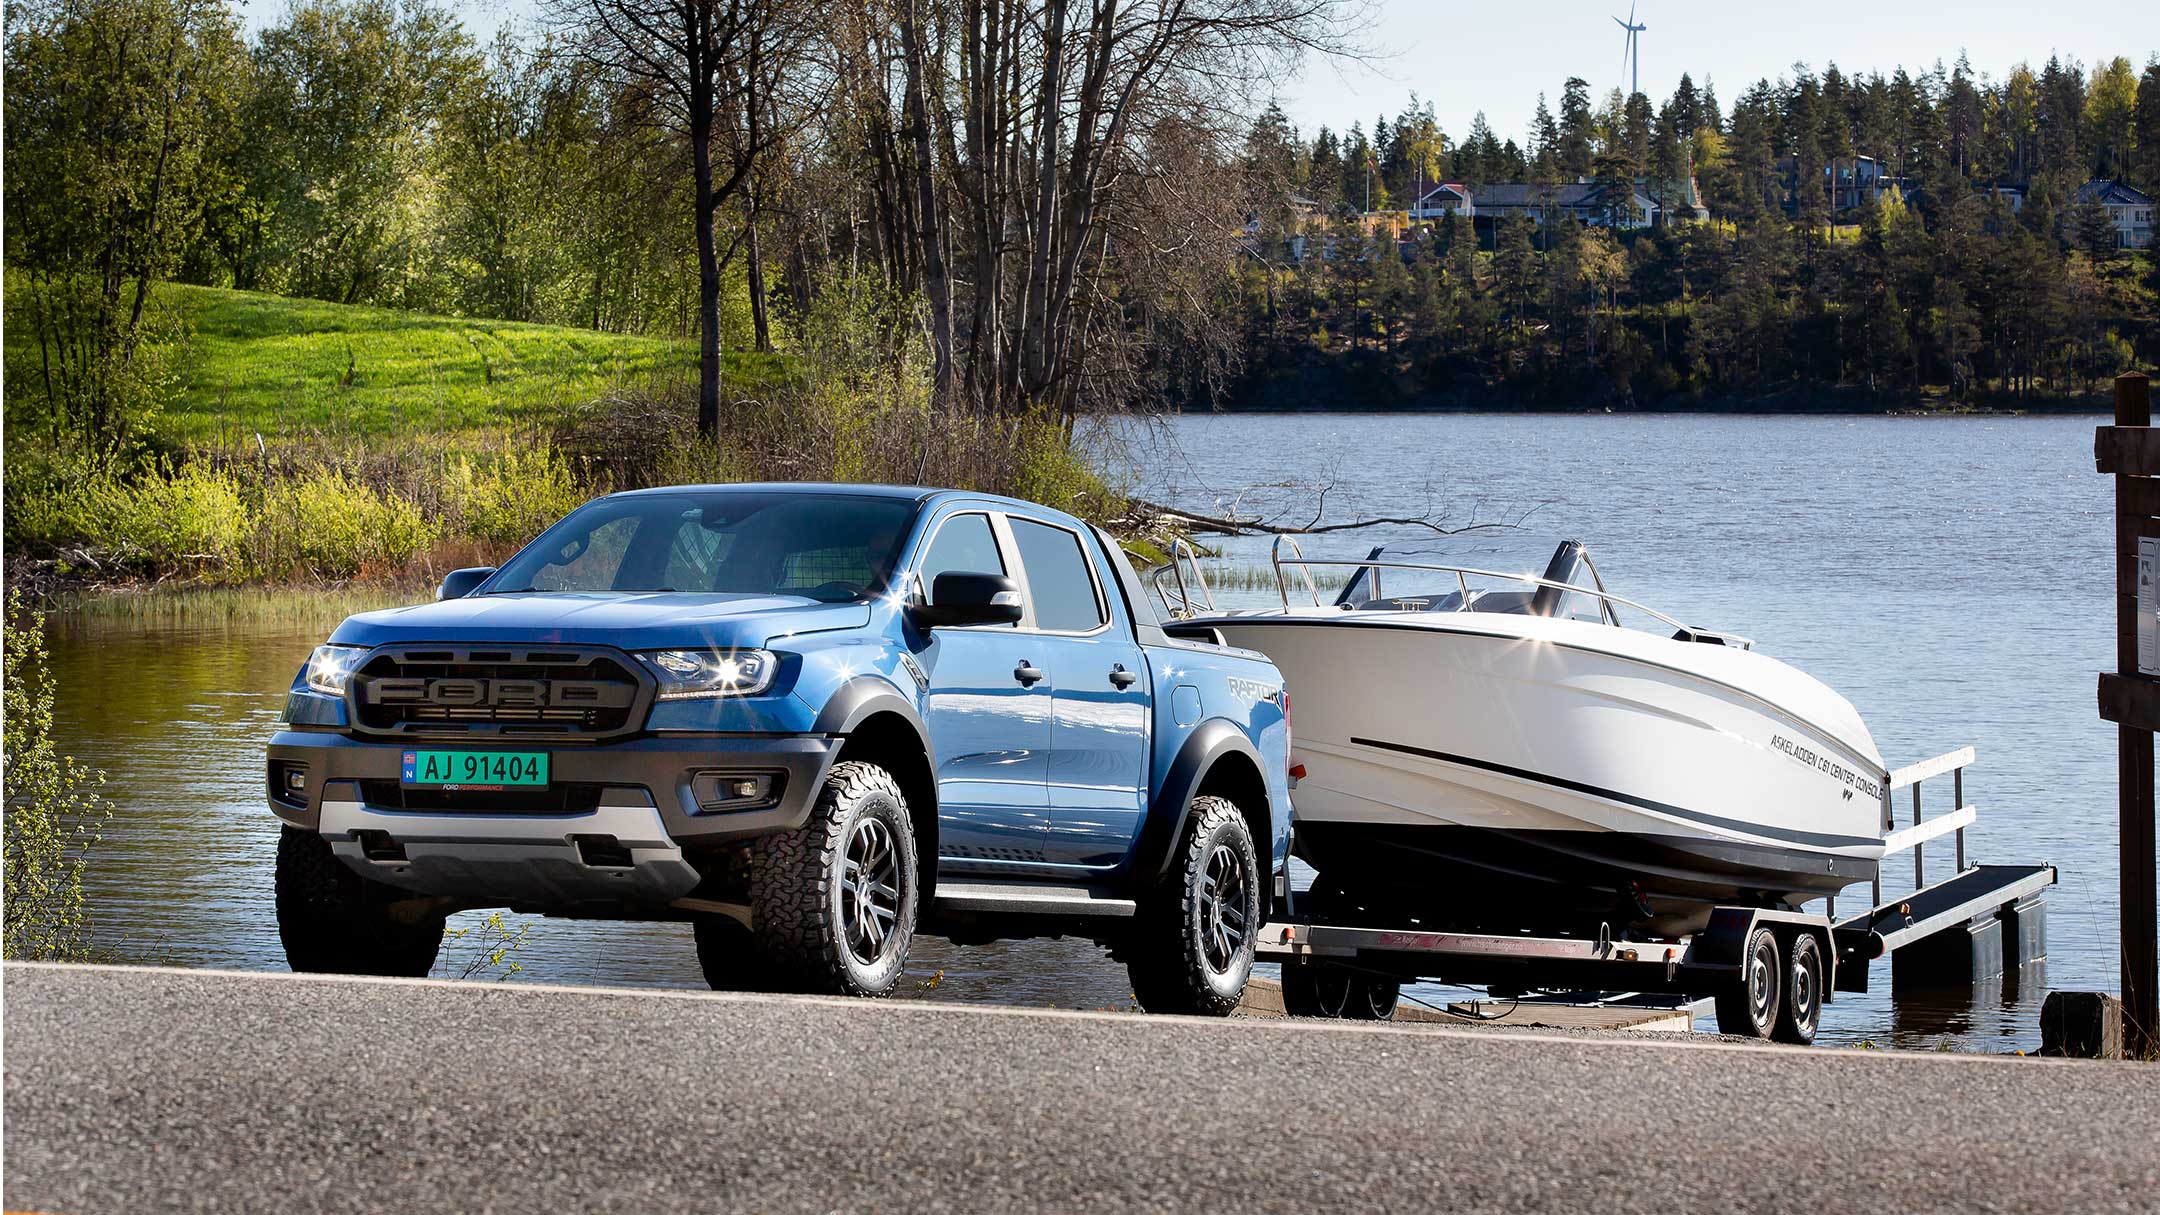 Ford Ranger Raptor towing boat into river